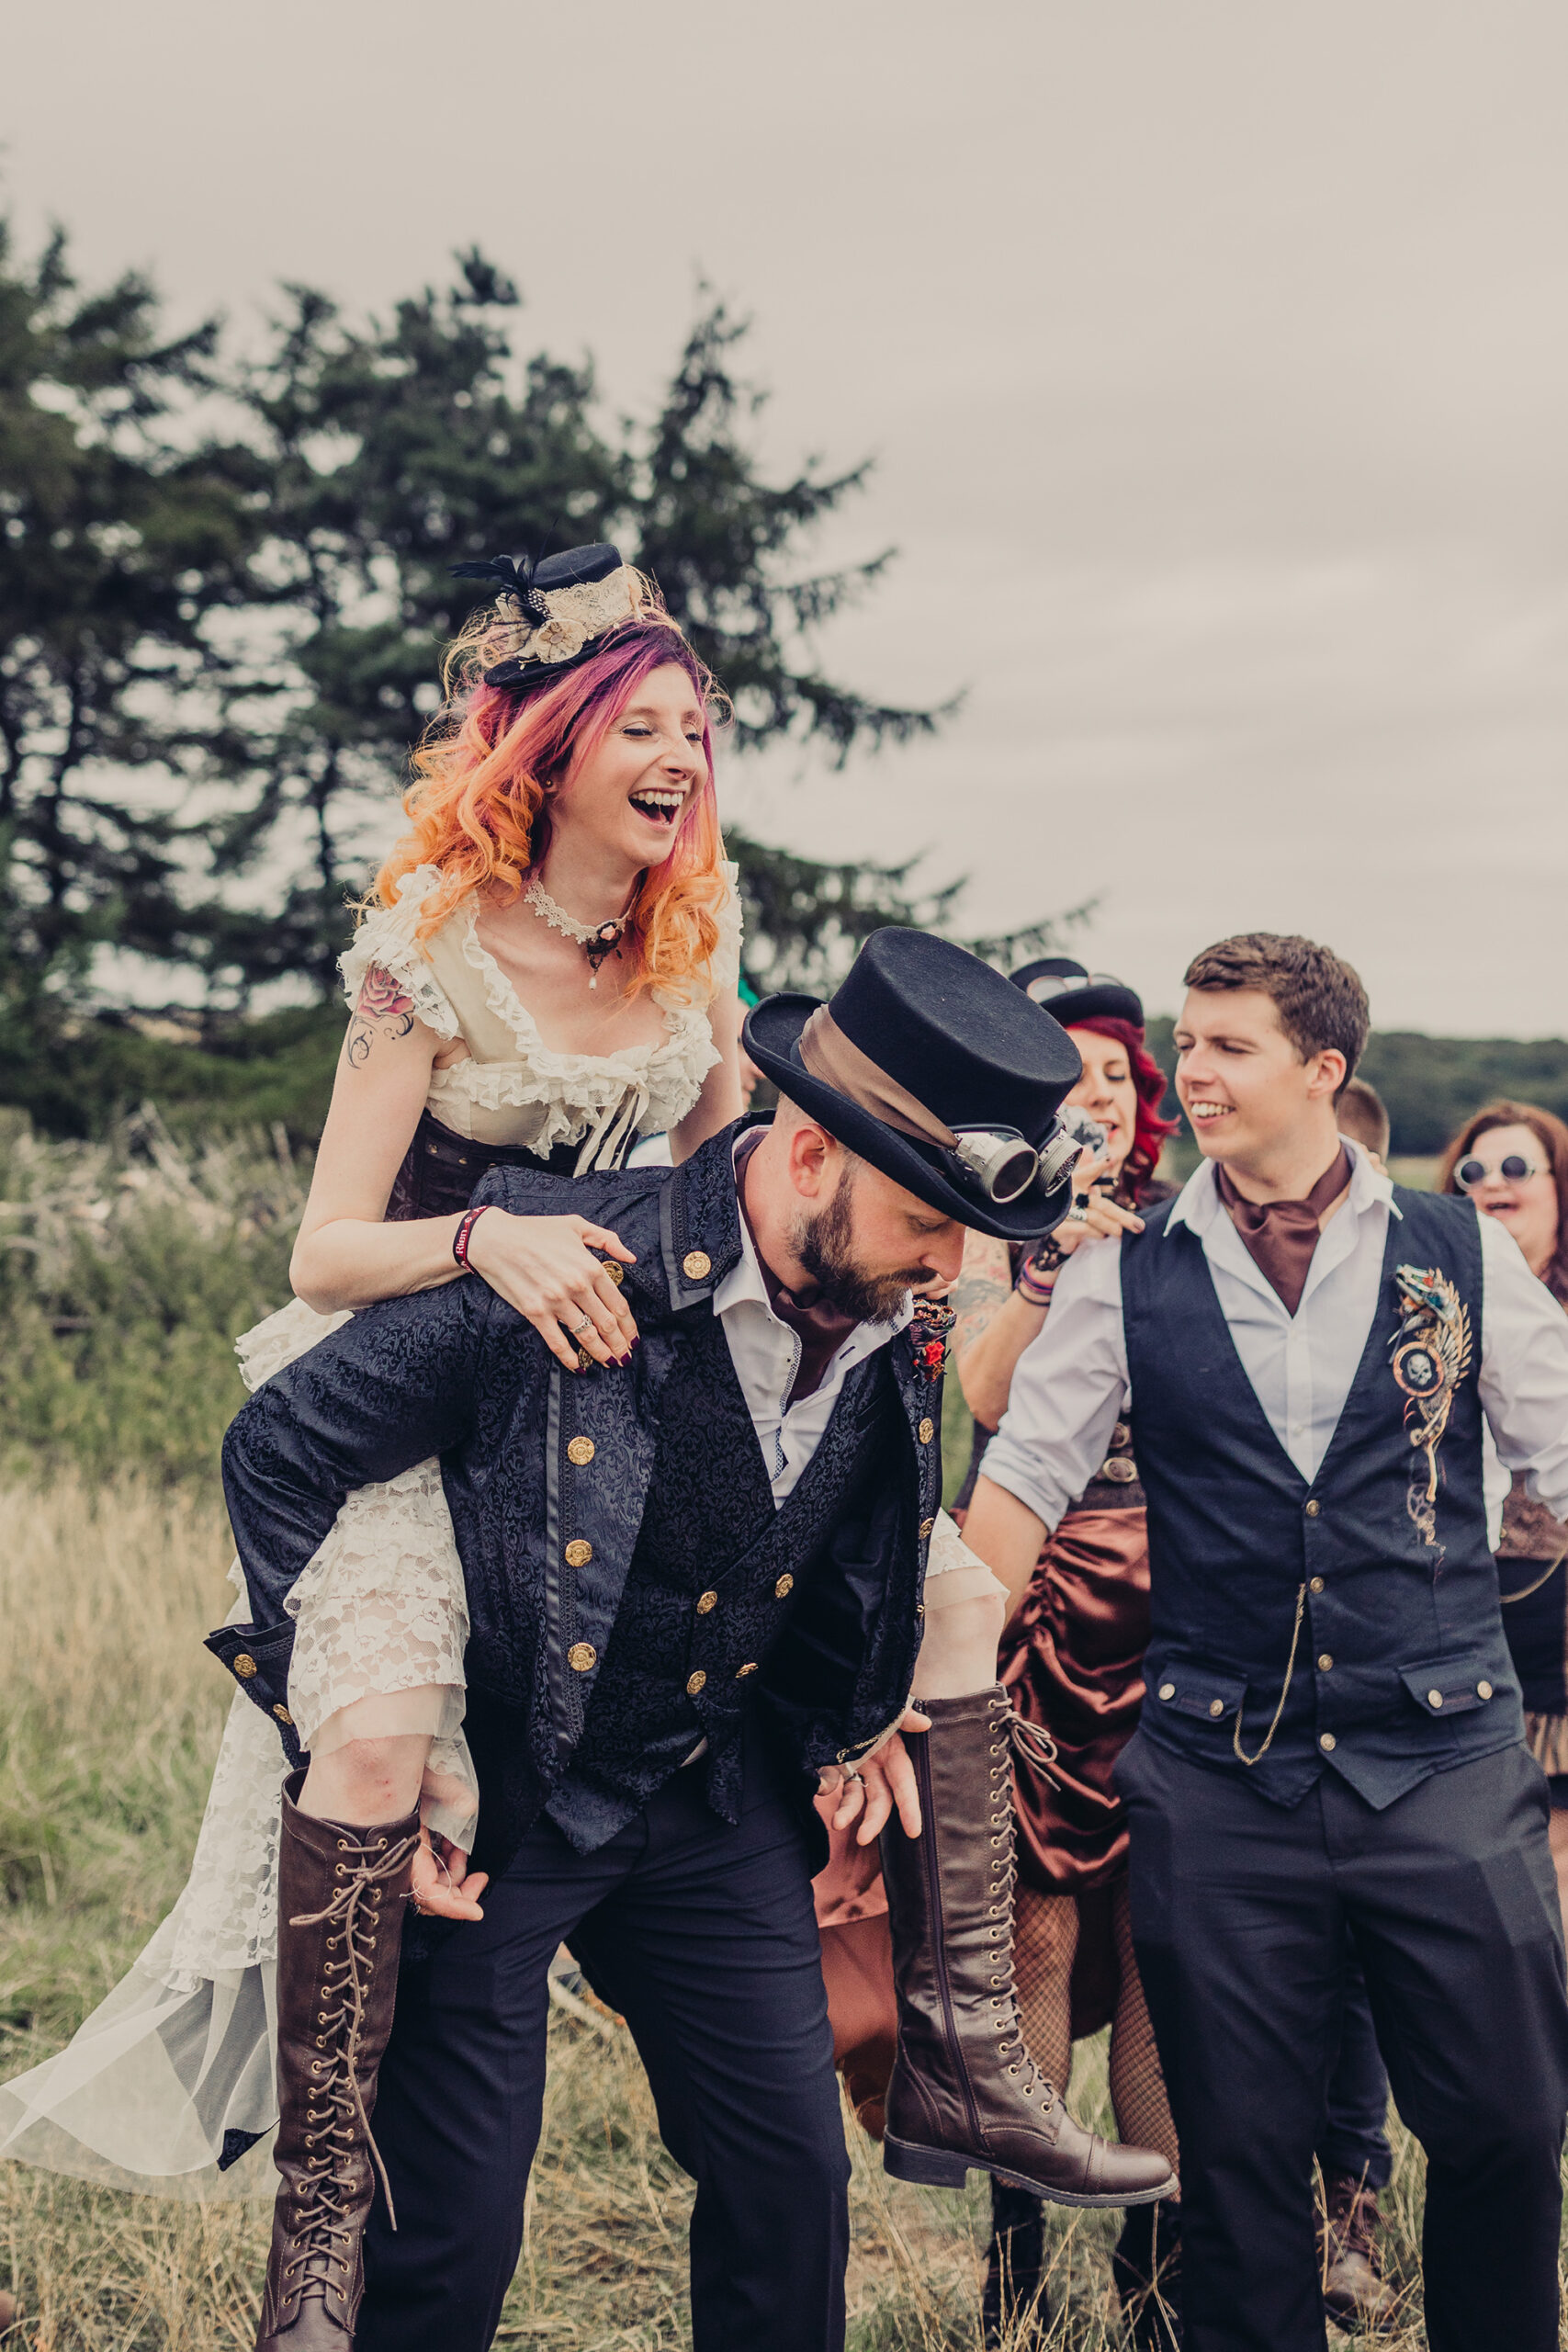 April Rien Steampunk Festival Wedding Chelsea Shoesmith Photography SBS 021 scaled